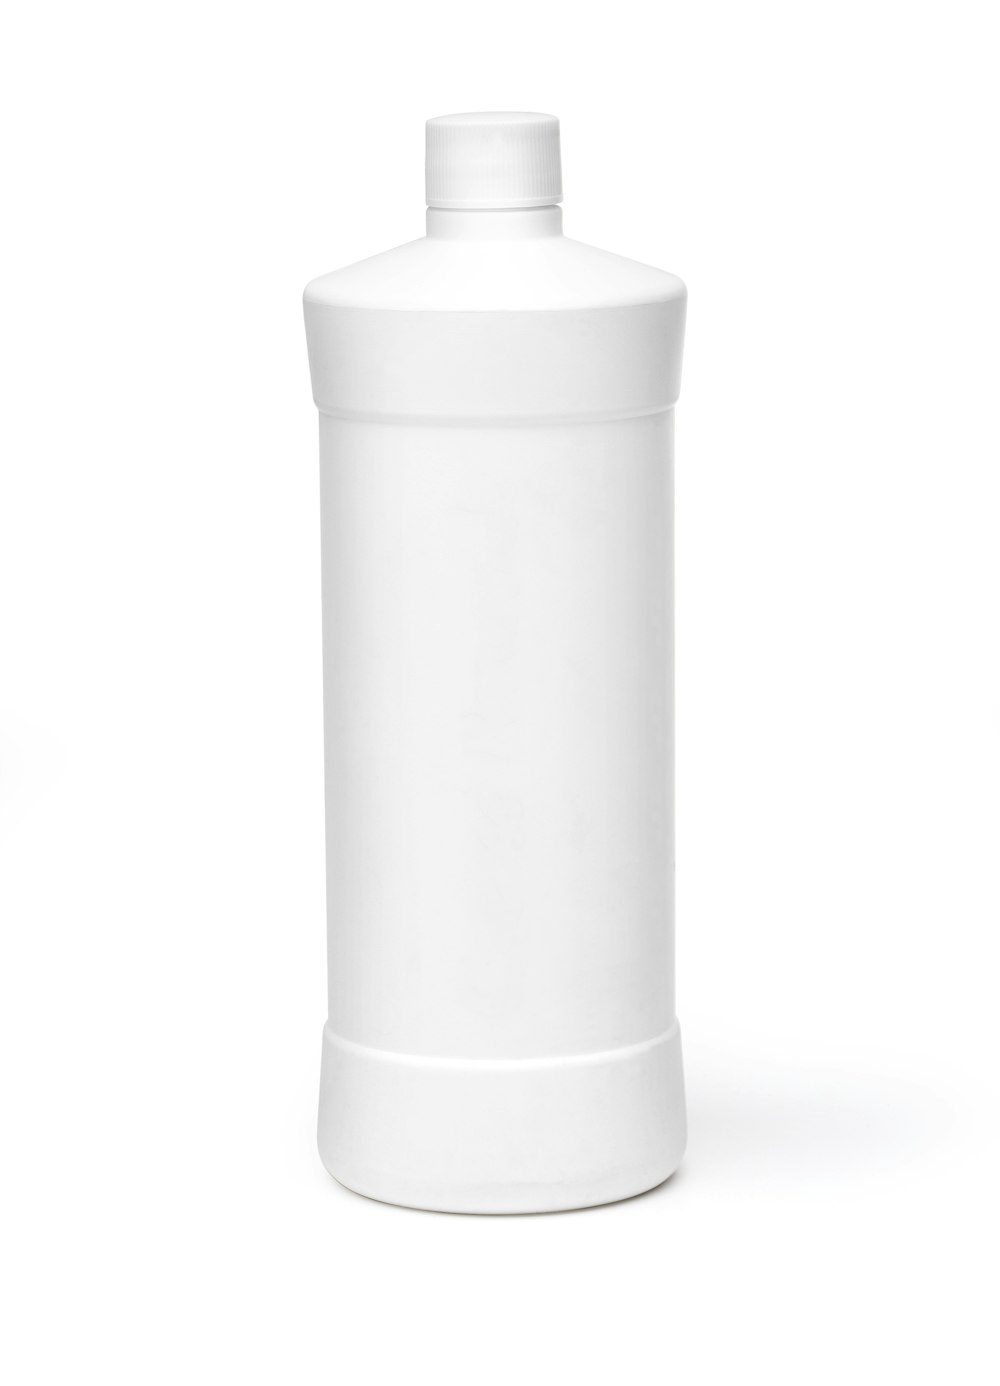 a white plastic bottle is shown on a white background